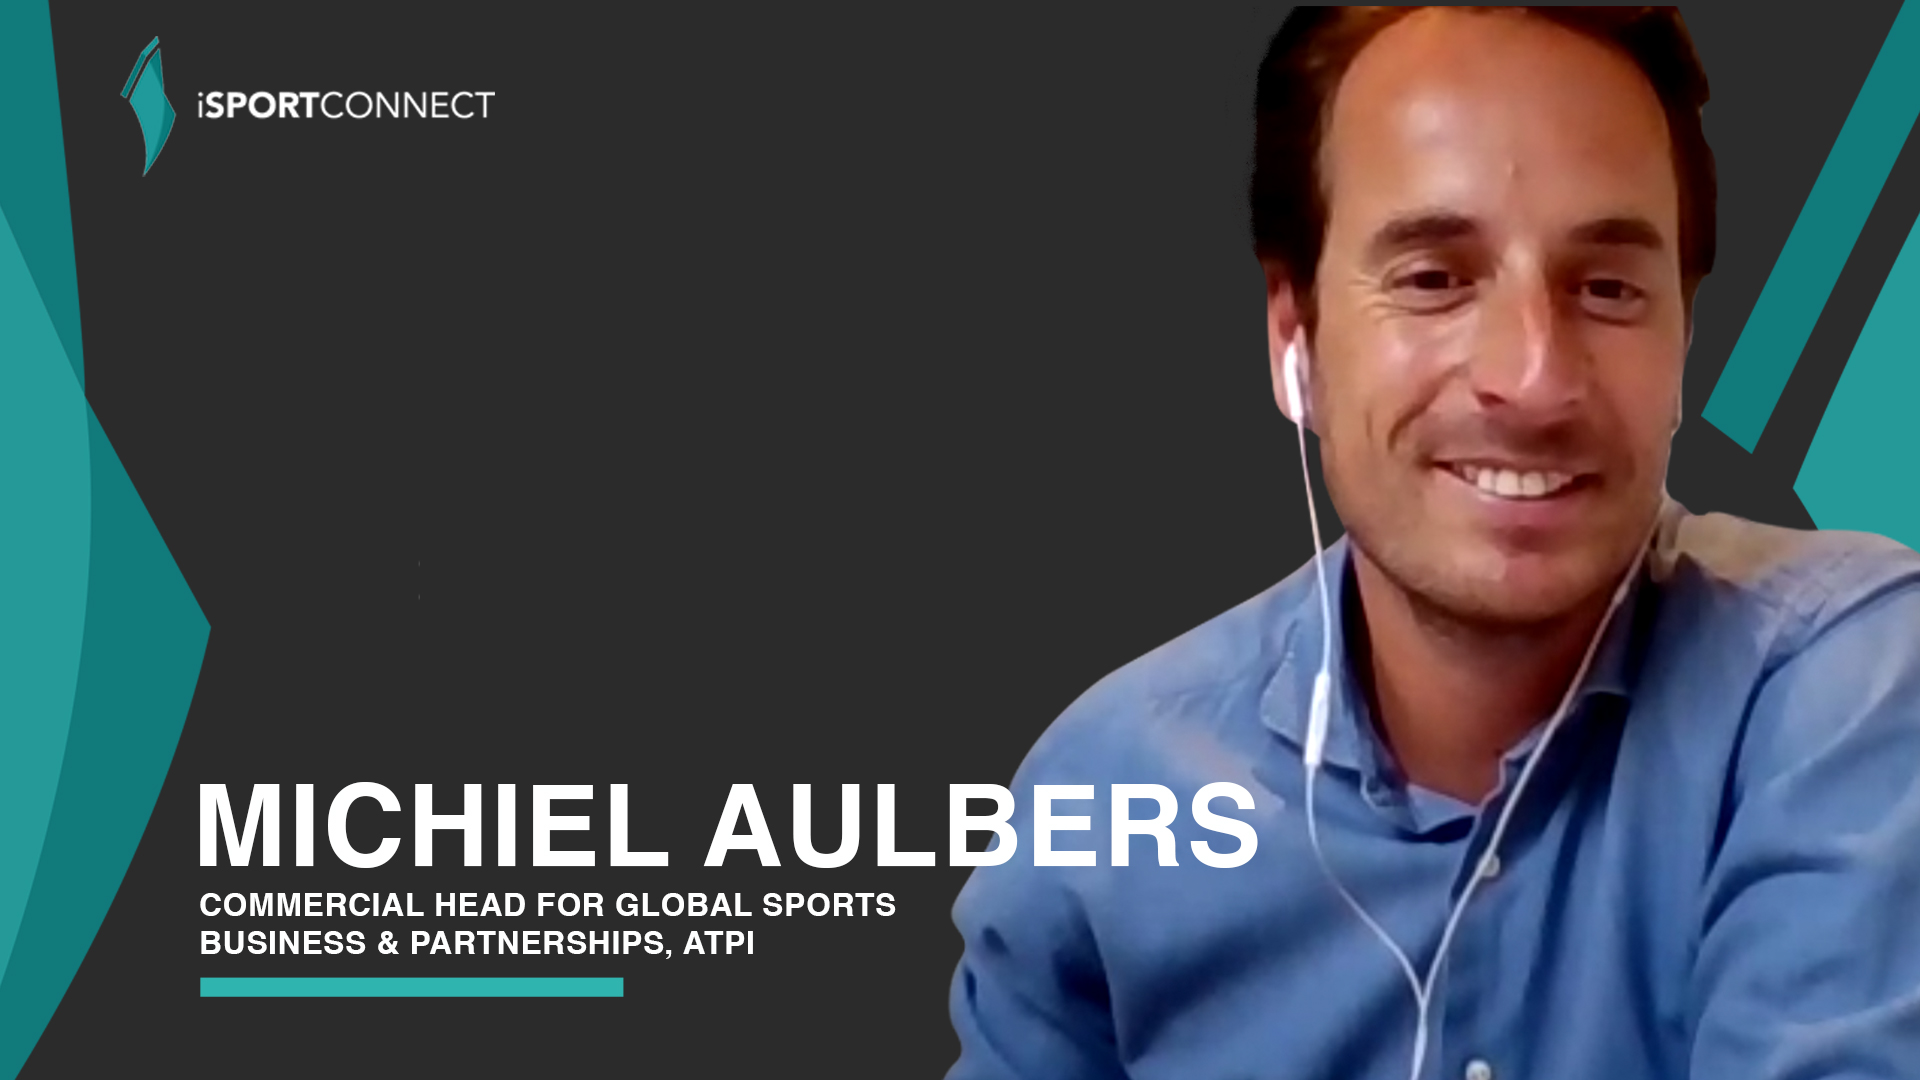  iSPORTCONNECT’s Interview With Michiel Aulbers, ATPI’s Head Of Global Sports Business & Partnerships